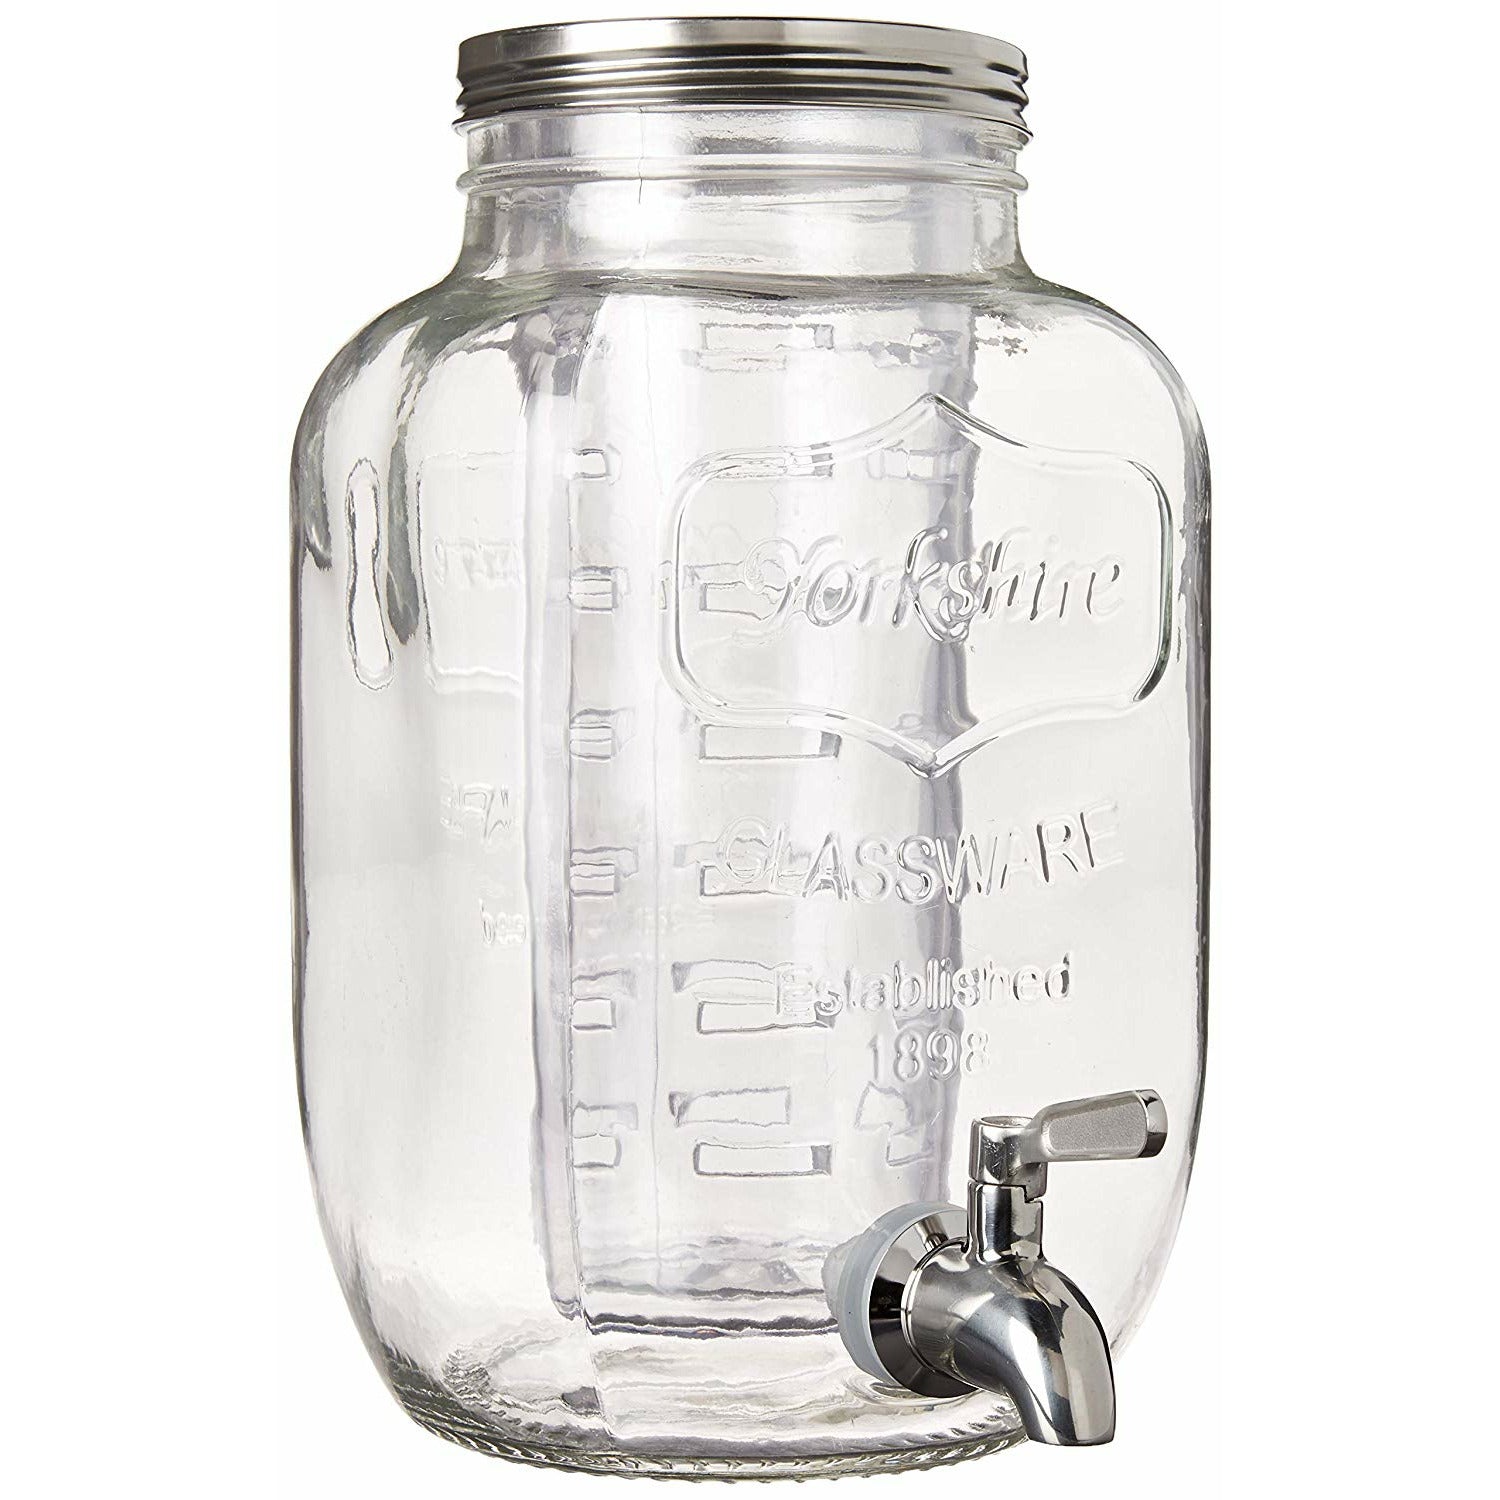 Kitchentoolz 2 Gallon Glass Beverage Dispenser with Metal Spigot - Yorkshire Mason Jar Glassware with Wide Mouth Metal Lid - Great for Sun Tea Iced TE